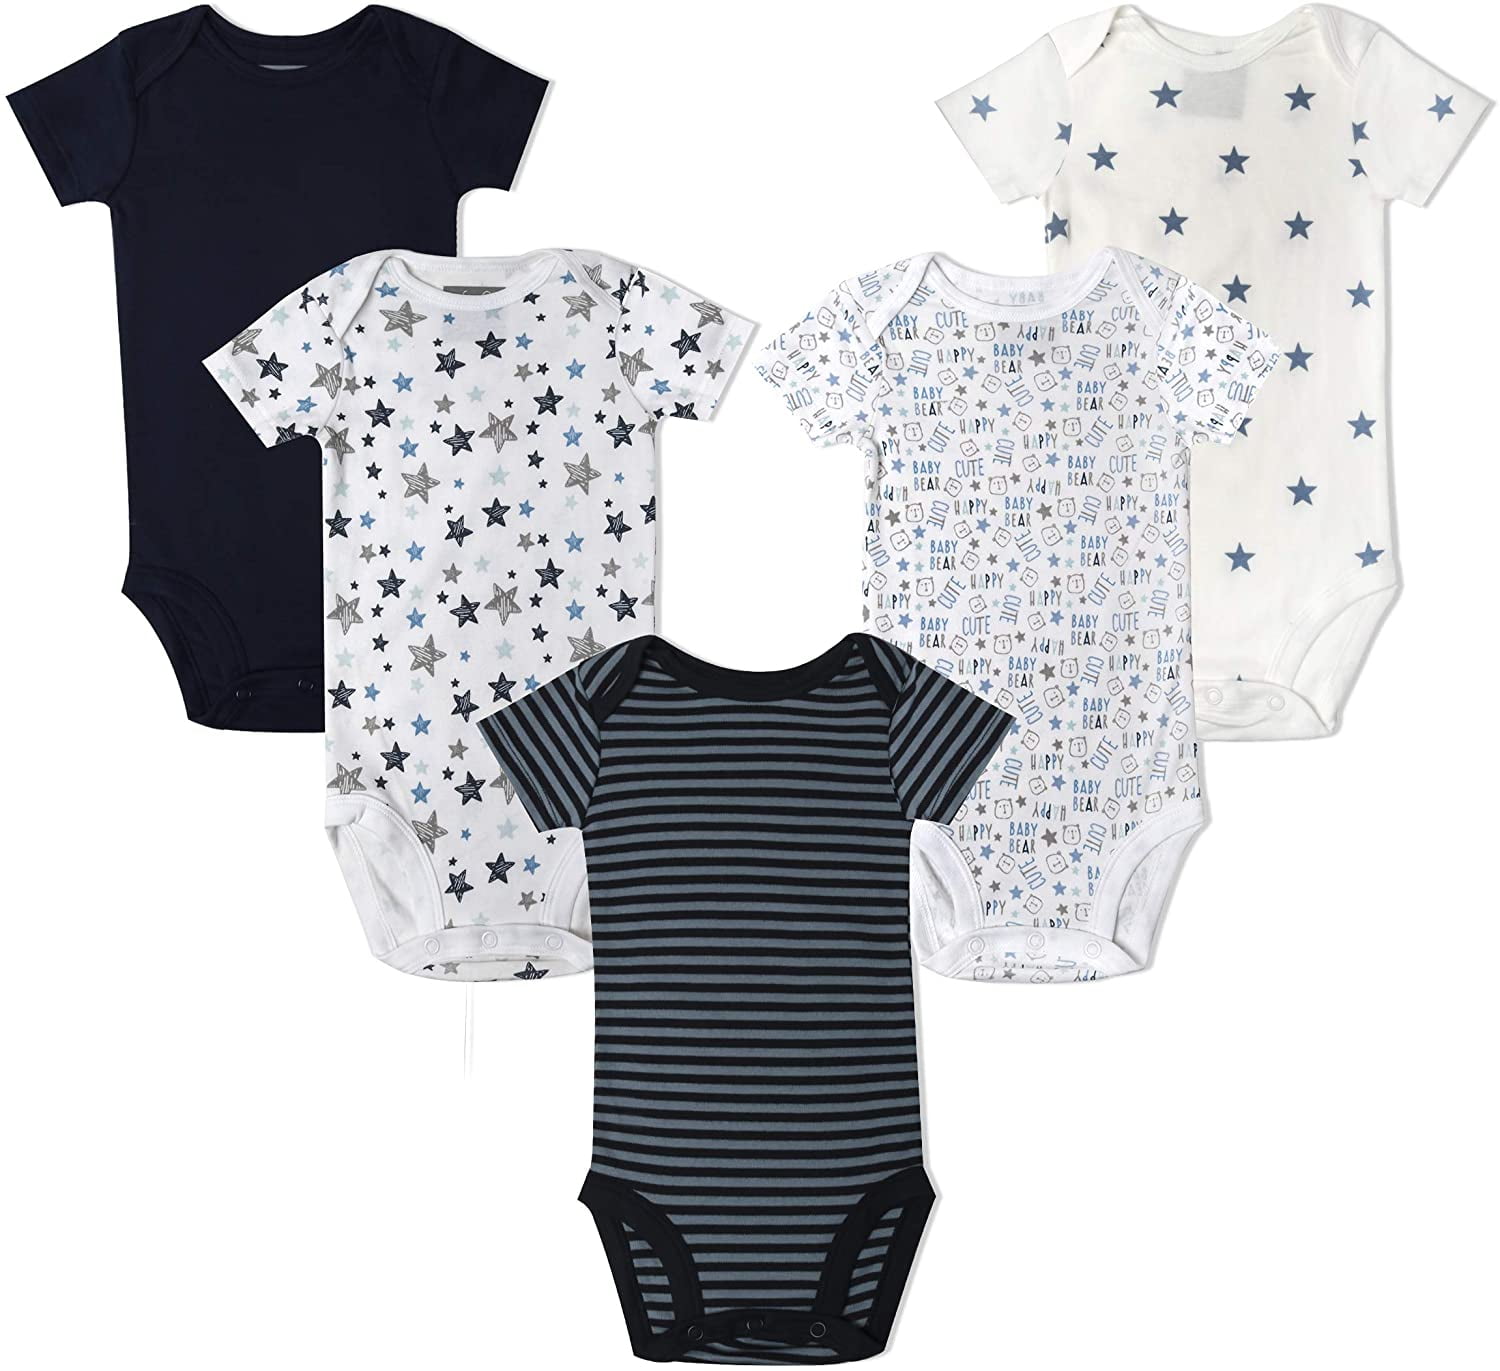 Lily and Page Gender Neutral Baby 5 Pack Boy Girl Unisex Jumpsuit Newborn Infant 